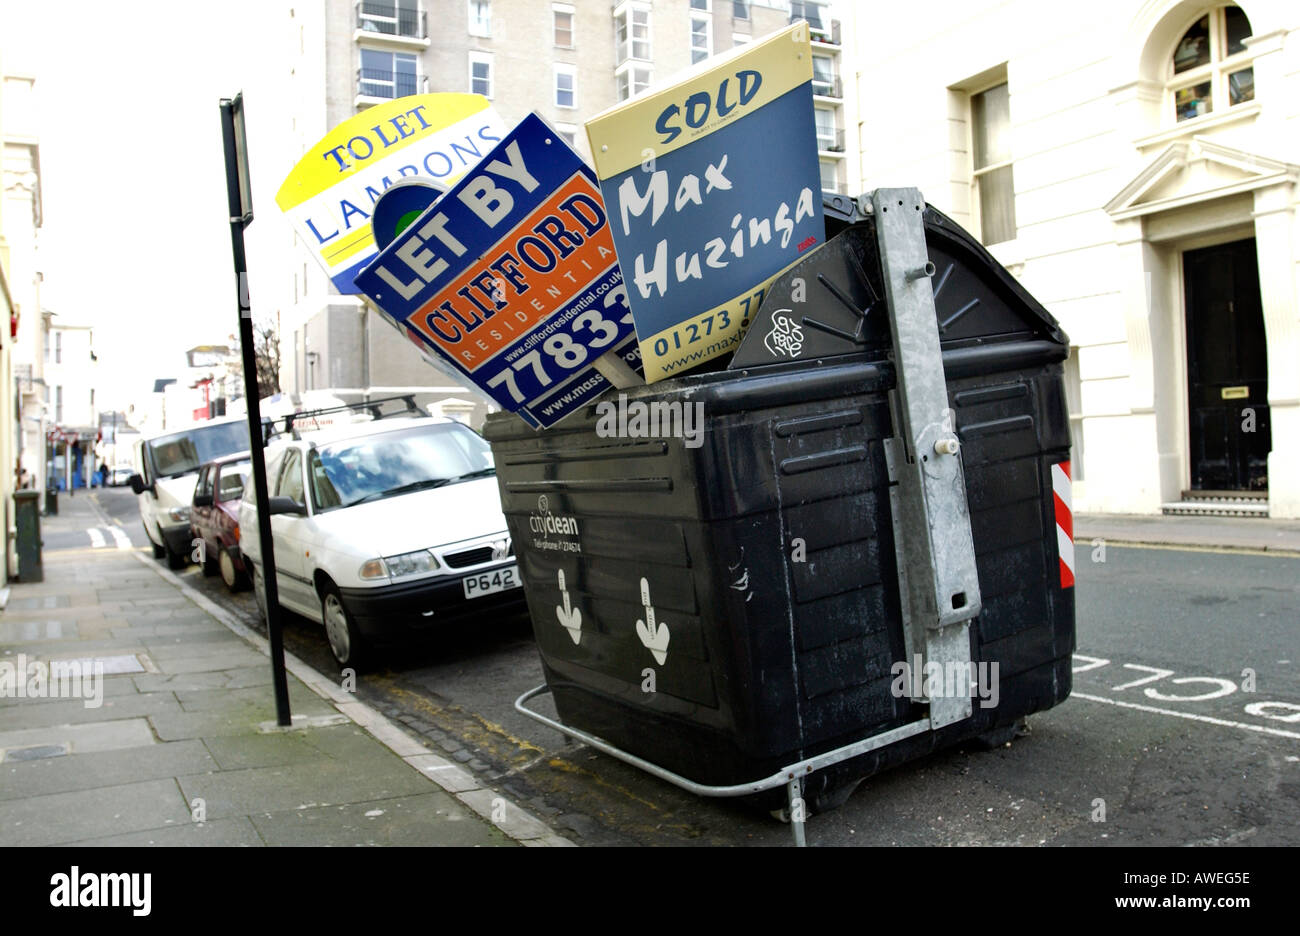 Discarded House Sold and To Let signs are crammed into a Brighton And Hove City Council Waste Bin Stock Photo